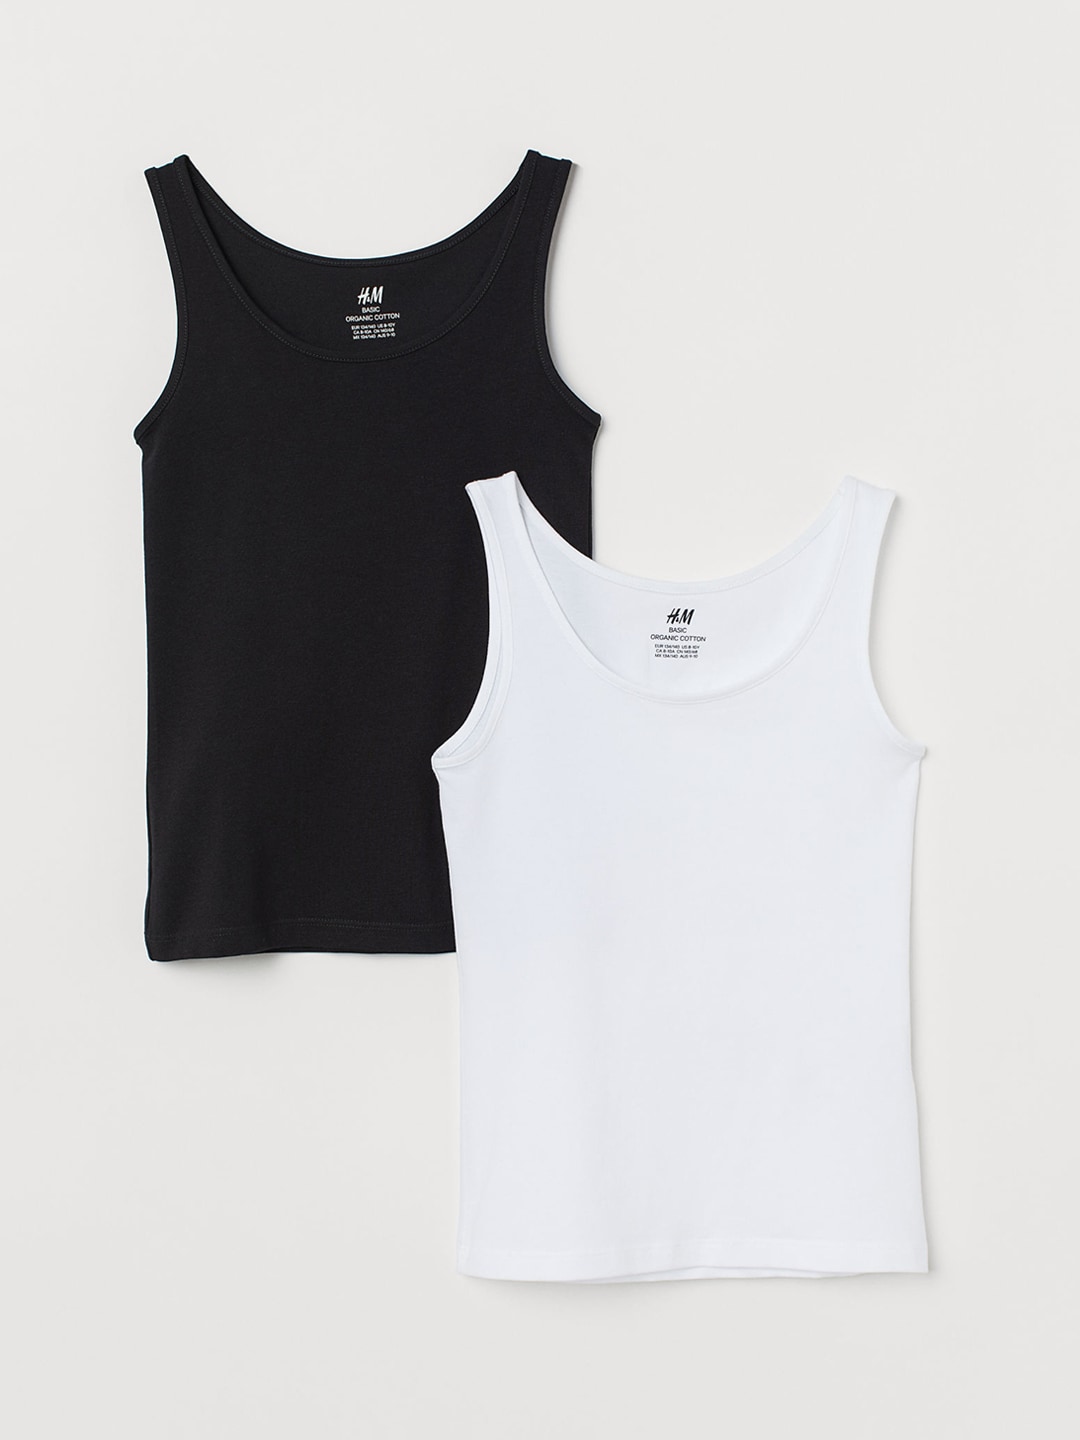 H&M Girls 2-pack Vest Sustainable Top Price in India